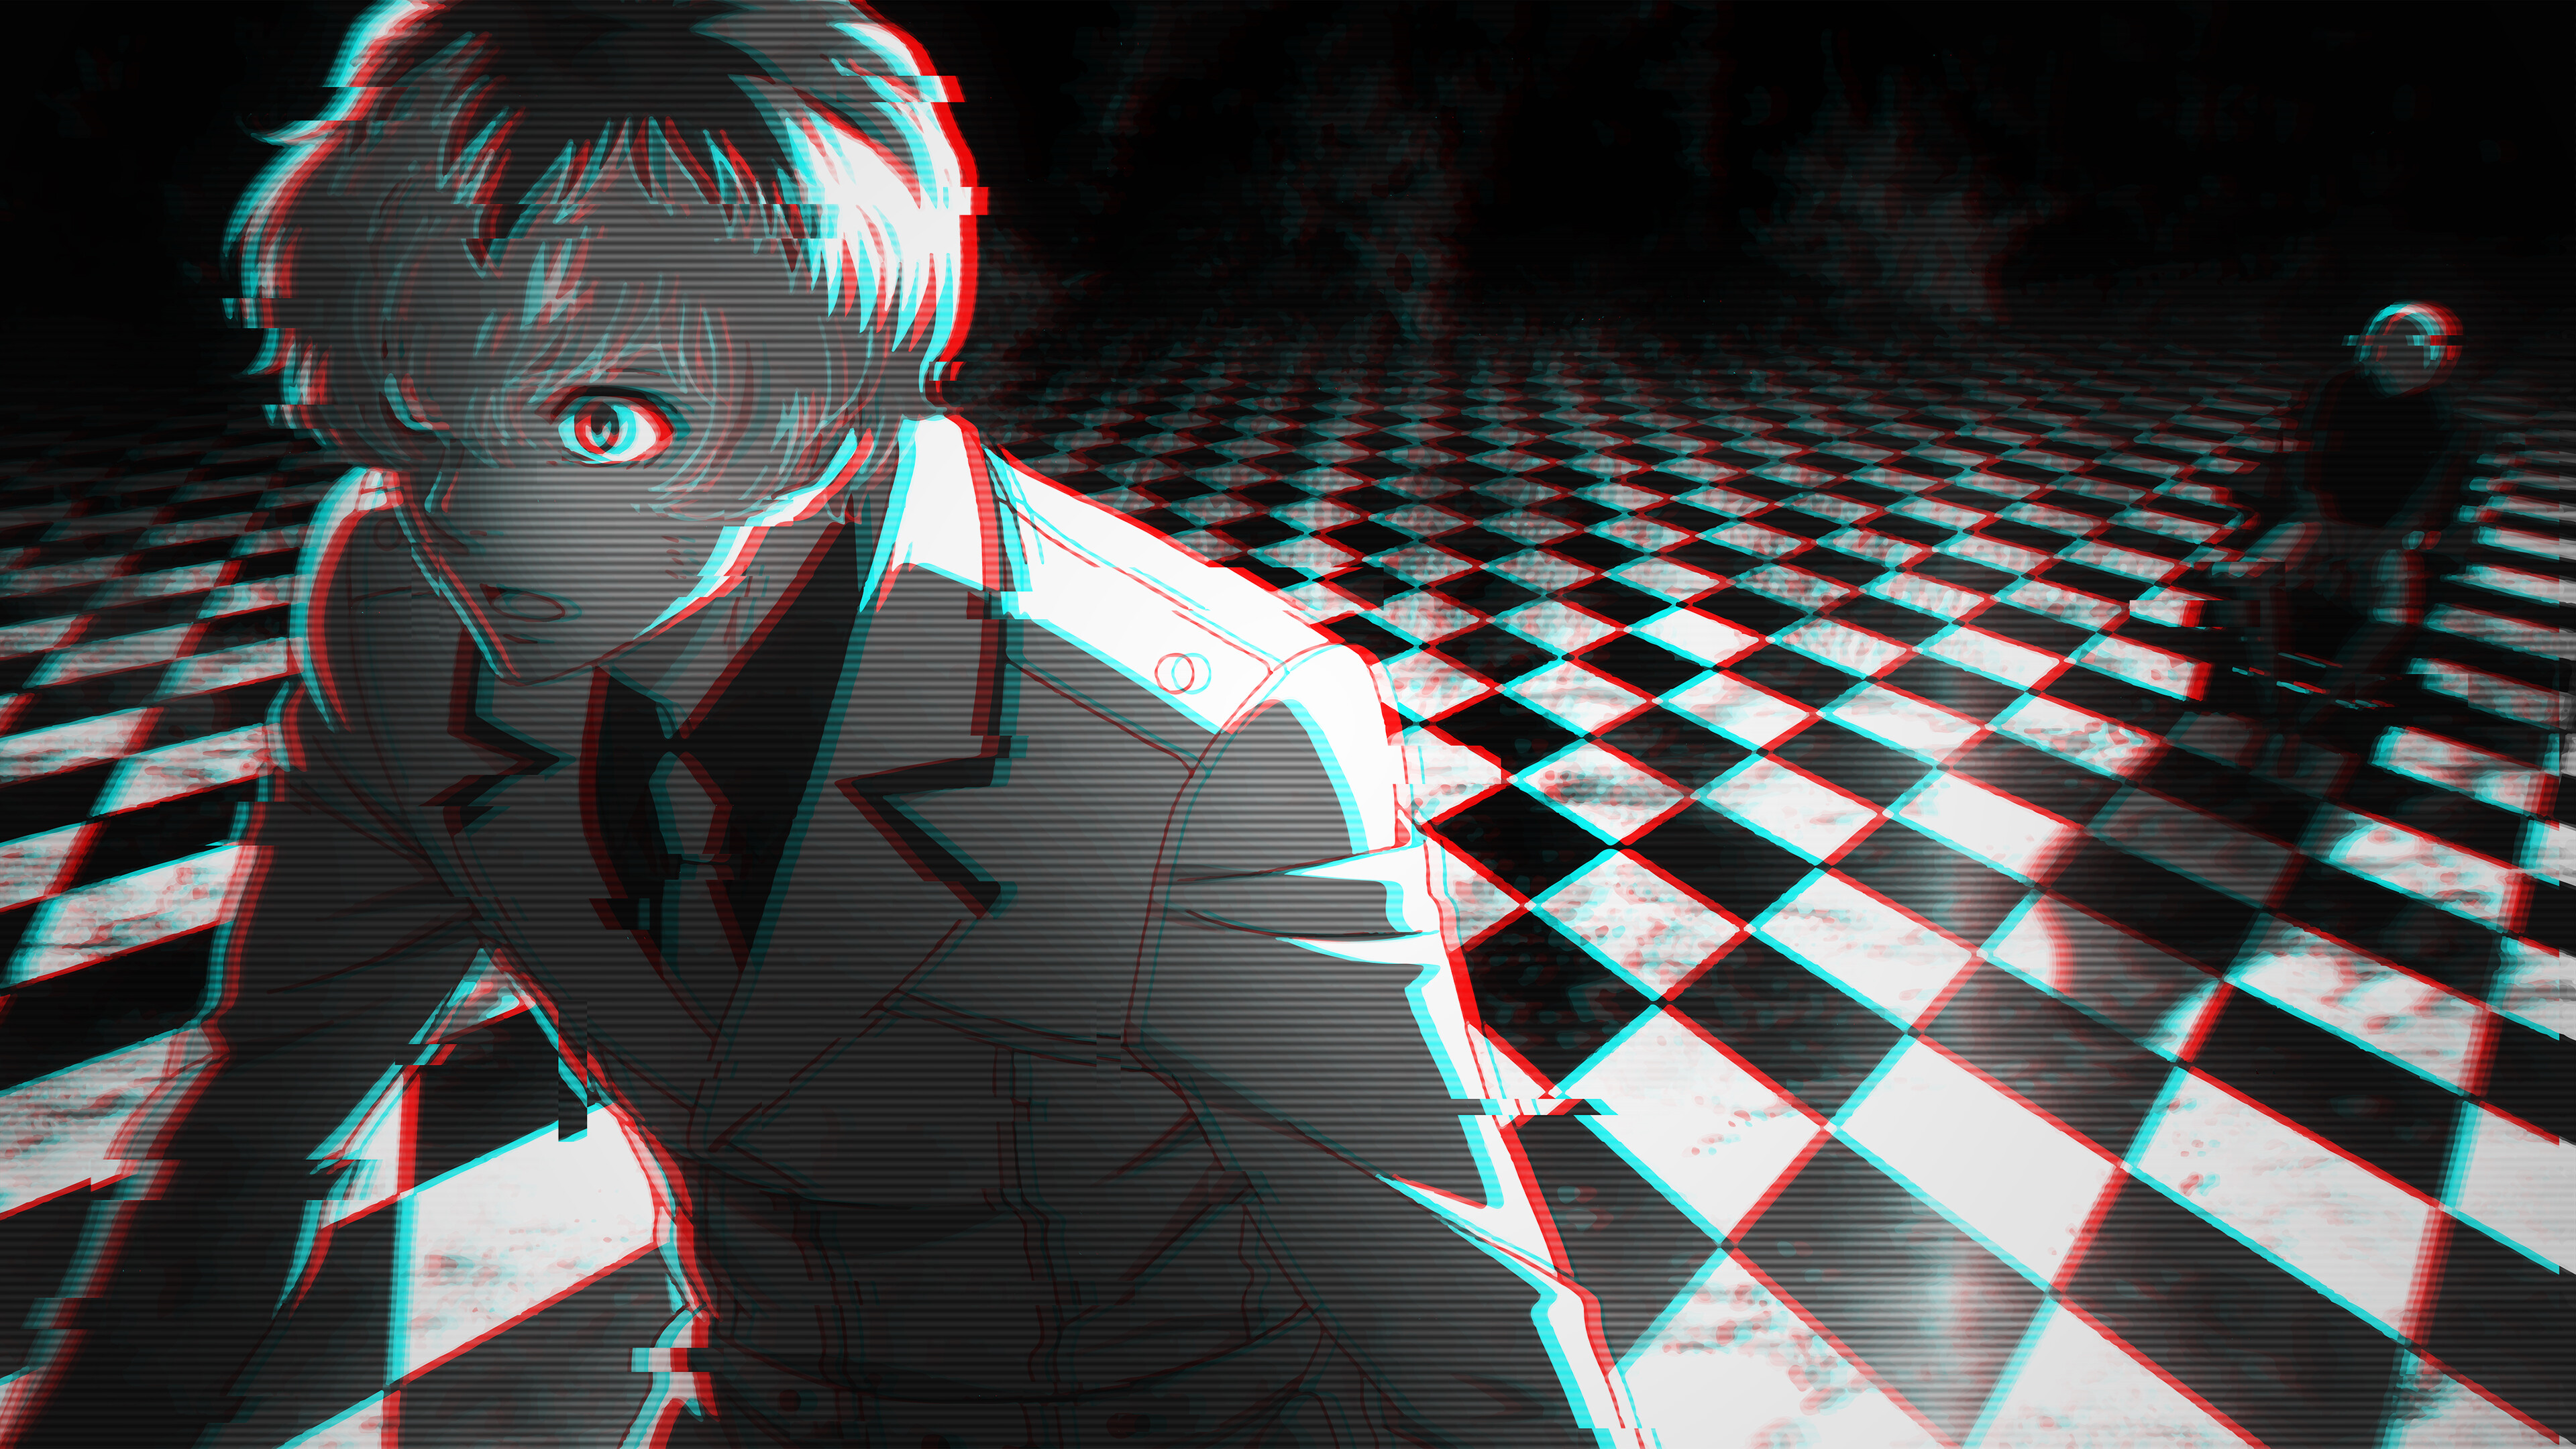 Glitch: Haise Sasaki, Tokyo Ghoul, Anime, Misplaced pixels, Inverted colors. 3840x2160 4K Background.